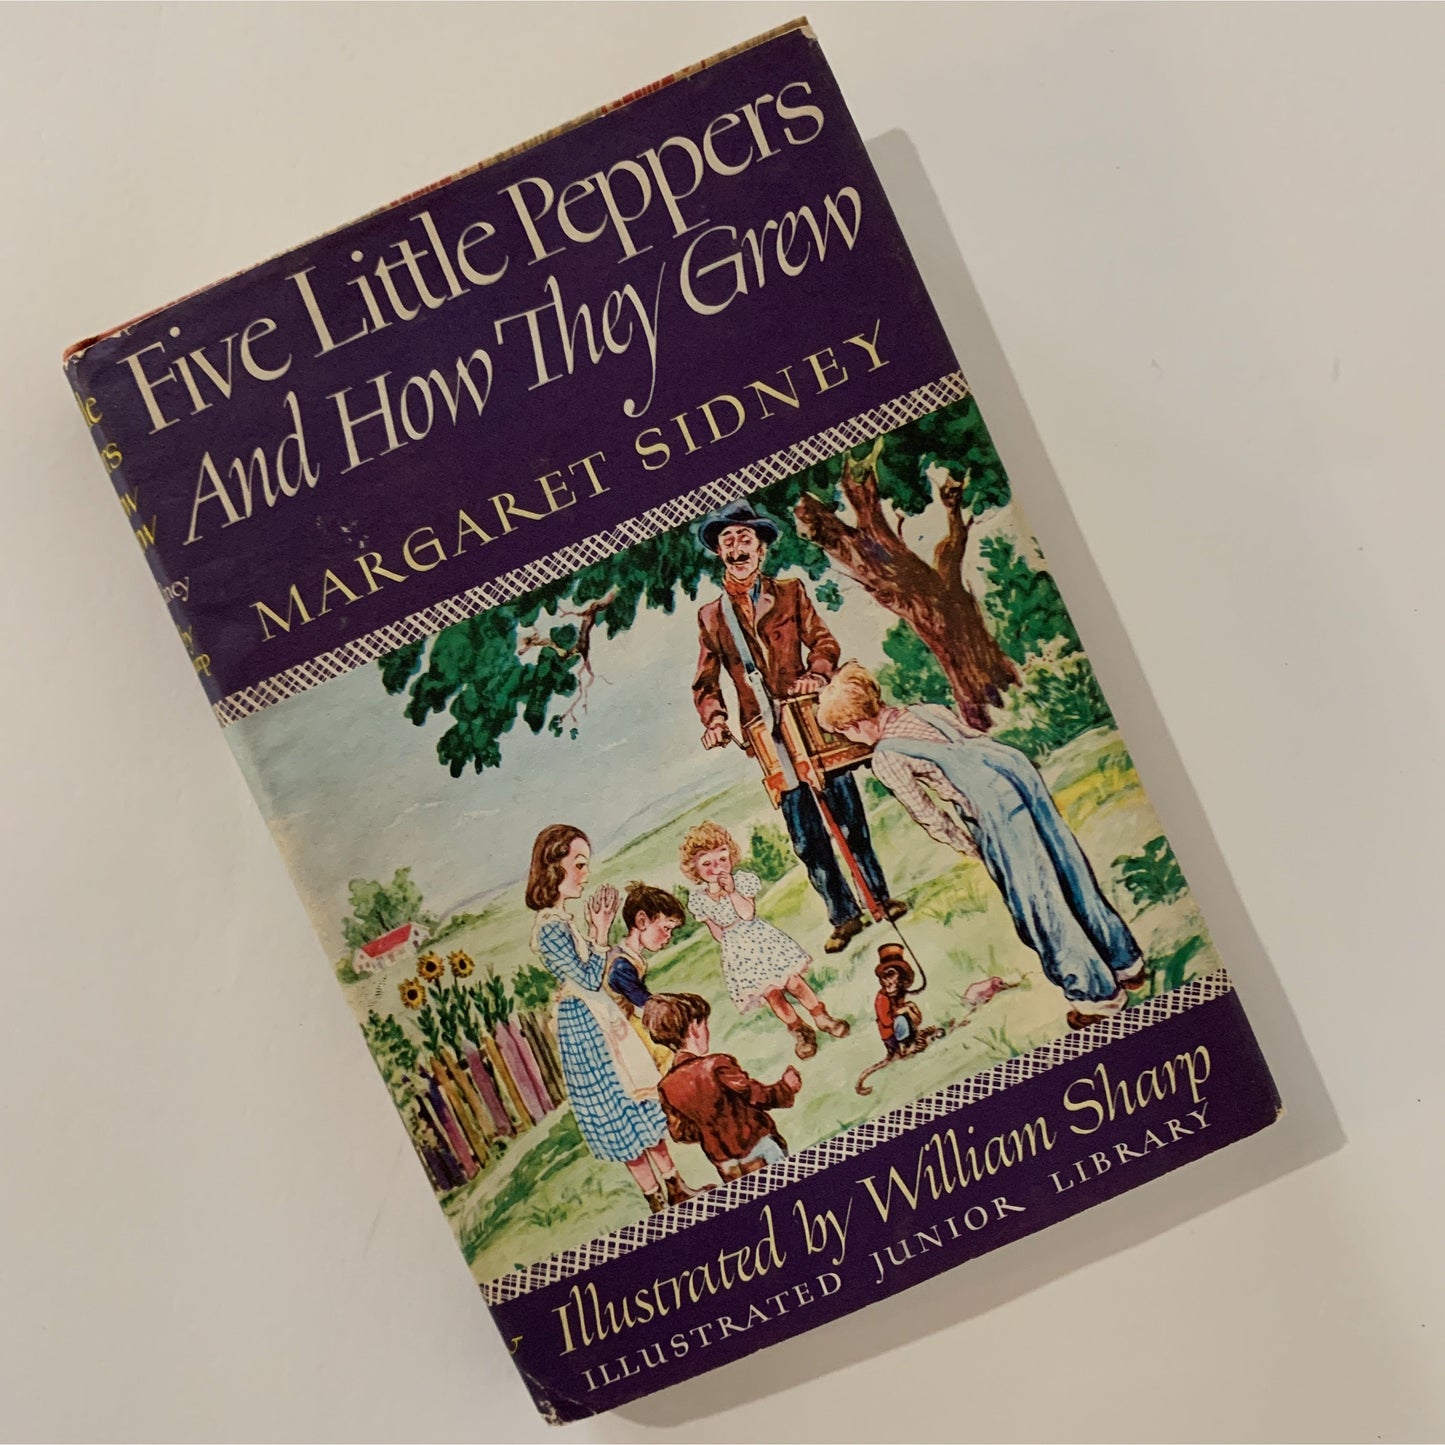 Five Little Peppers and How They Grew, 1975 Illustrated Junior Library Hardcover